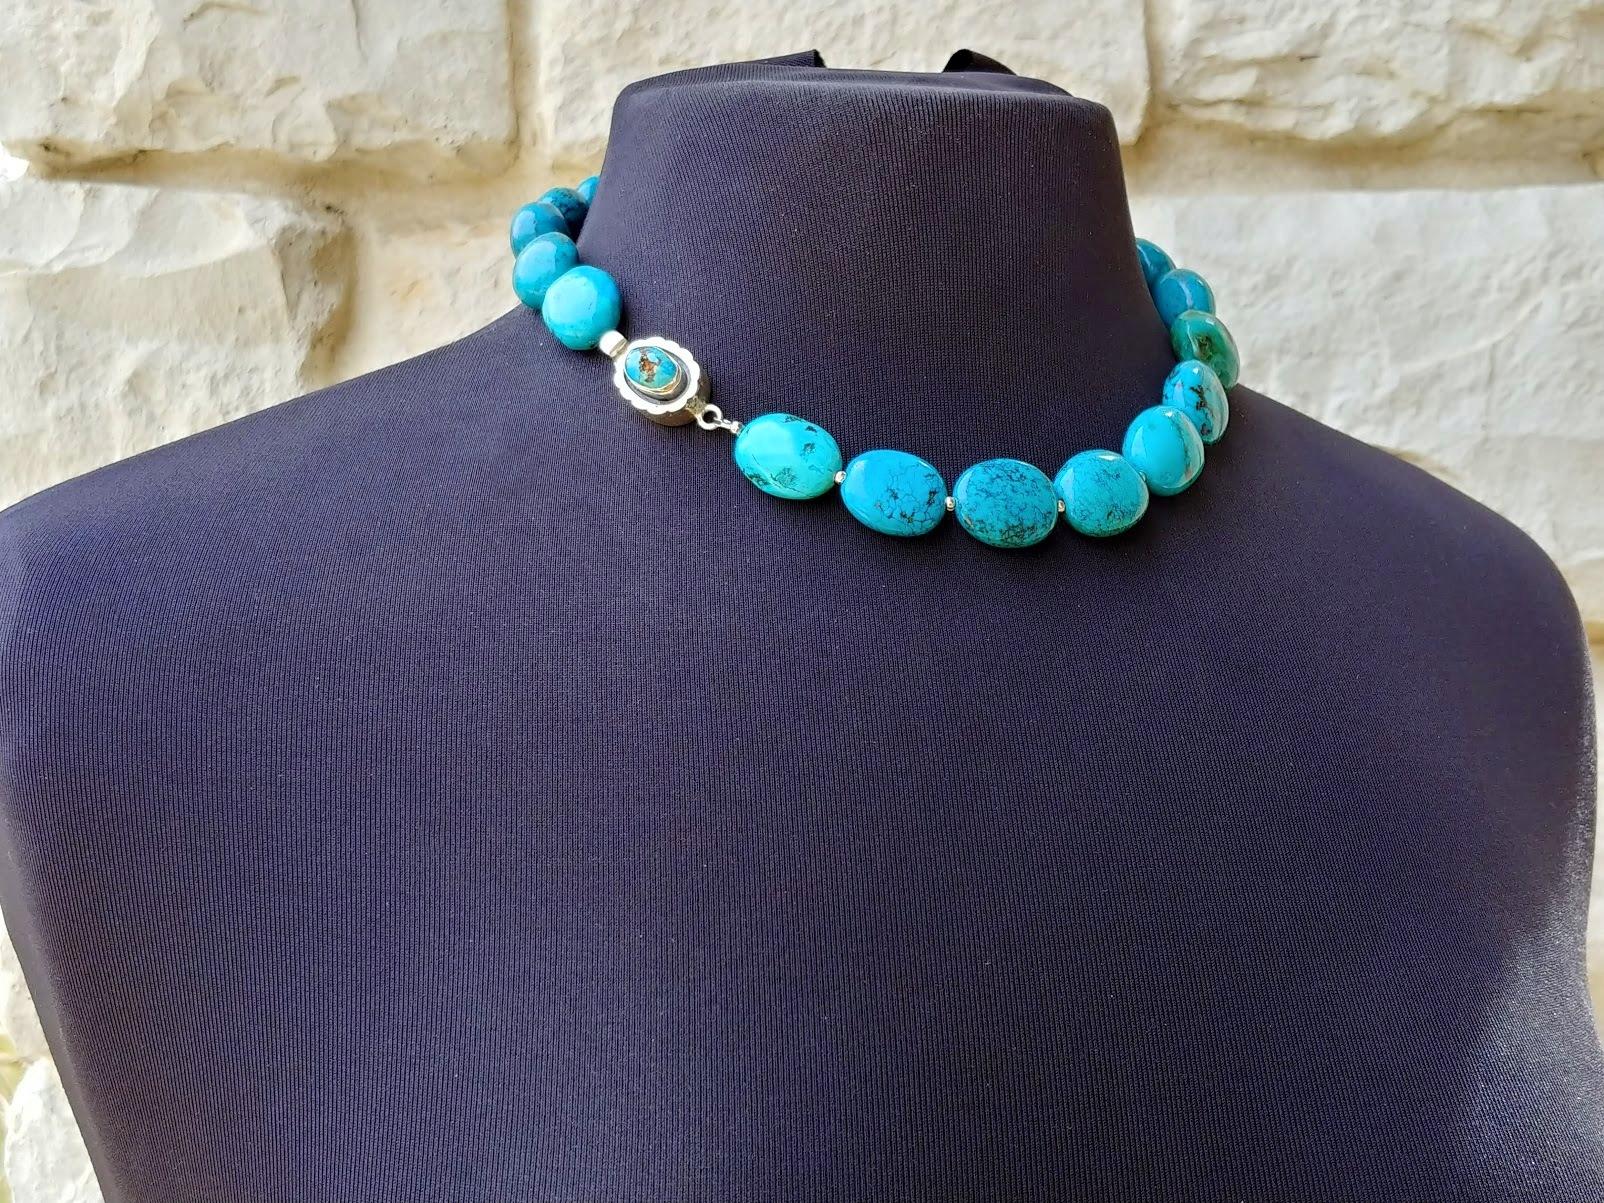 The length of the necklace is 18 inches (45 cm). The size of the oval-shaped loose beads is approximately 22 x 18 x 12 mm - 10 x 16 x 20 mm.
Turquoise ranges in color from a light shade of green to saturated blue. Turquoise beads have a dark brown